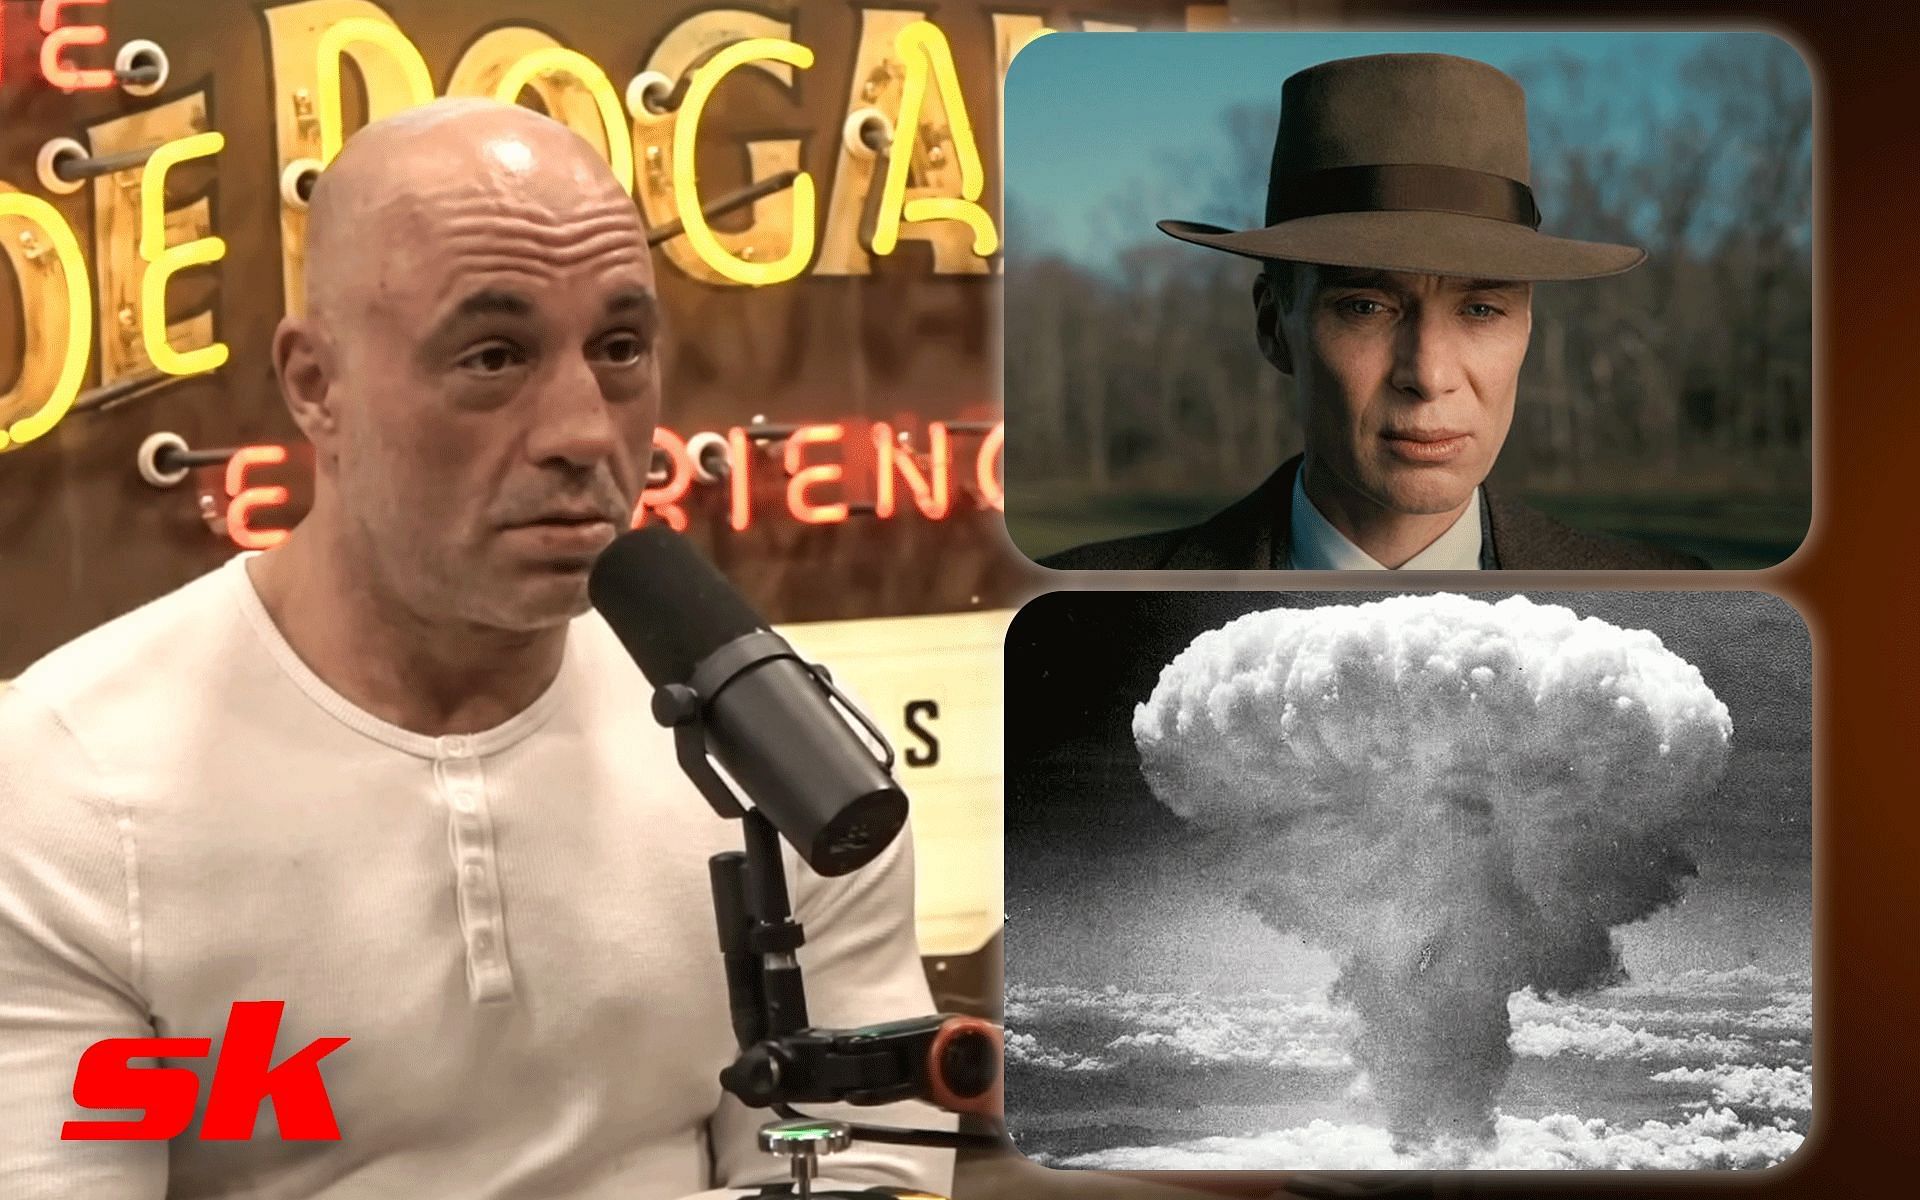 Joe Rogan nuke conspiracy theory [Images via: @WW2Facts and @CinemaTweets1 on Twitter, JRE Daily Clips | YouTube]